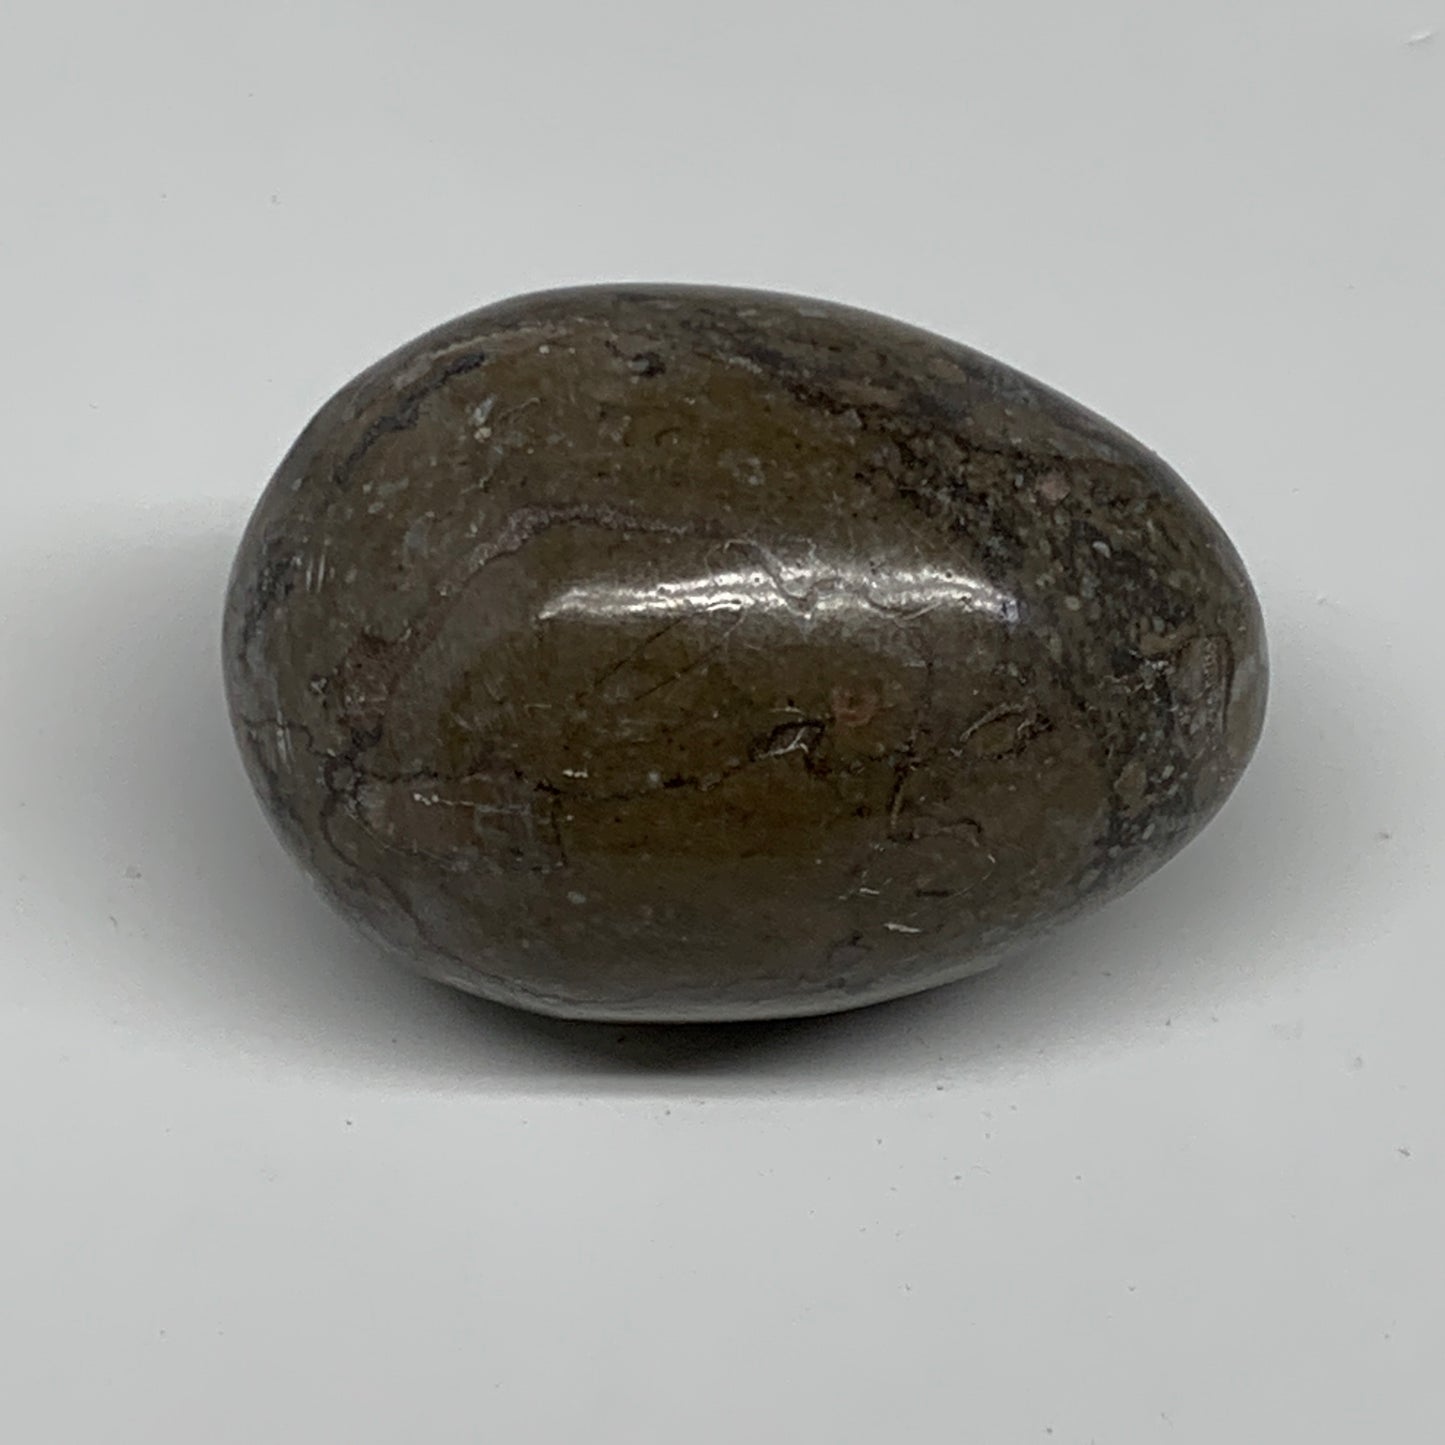 192.5g, 2.5"x1.8", Natural Fossil Orthoceras Stone Egg from Morocco, B31059